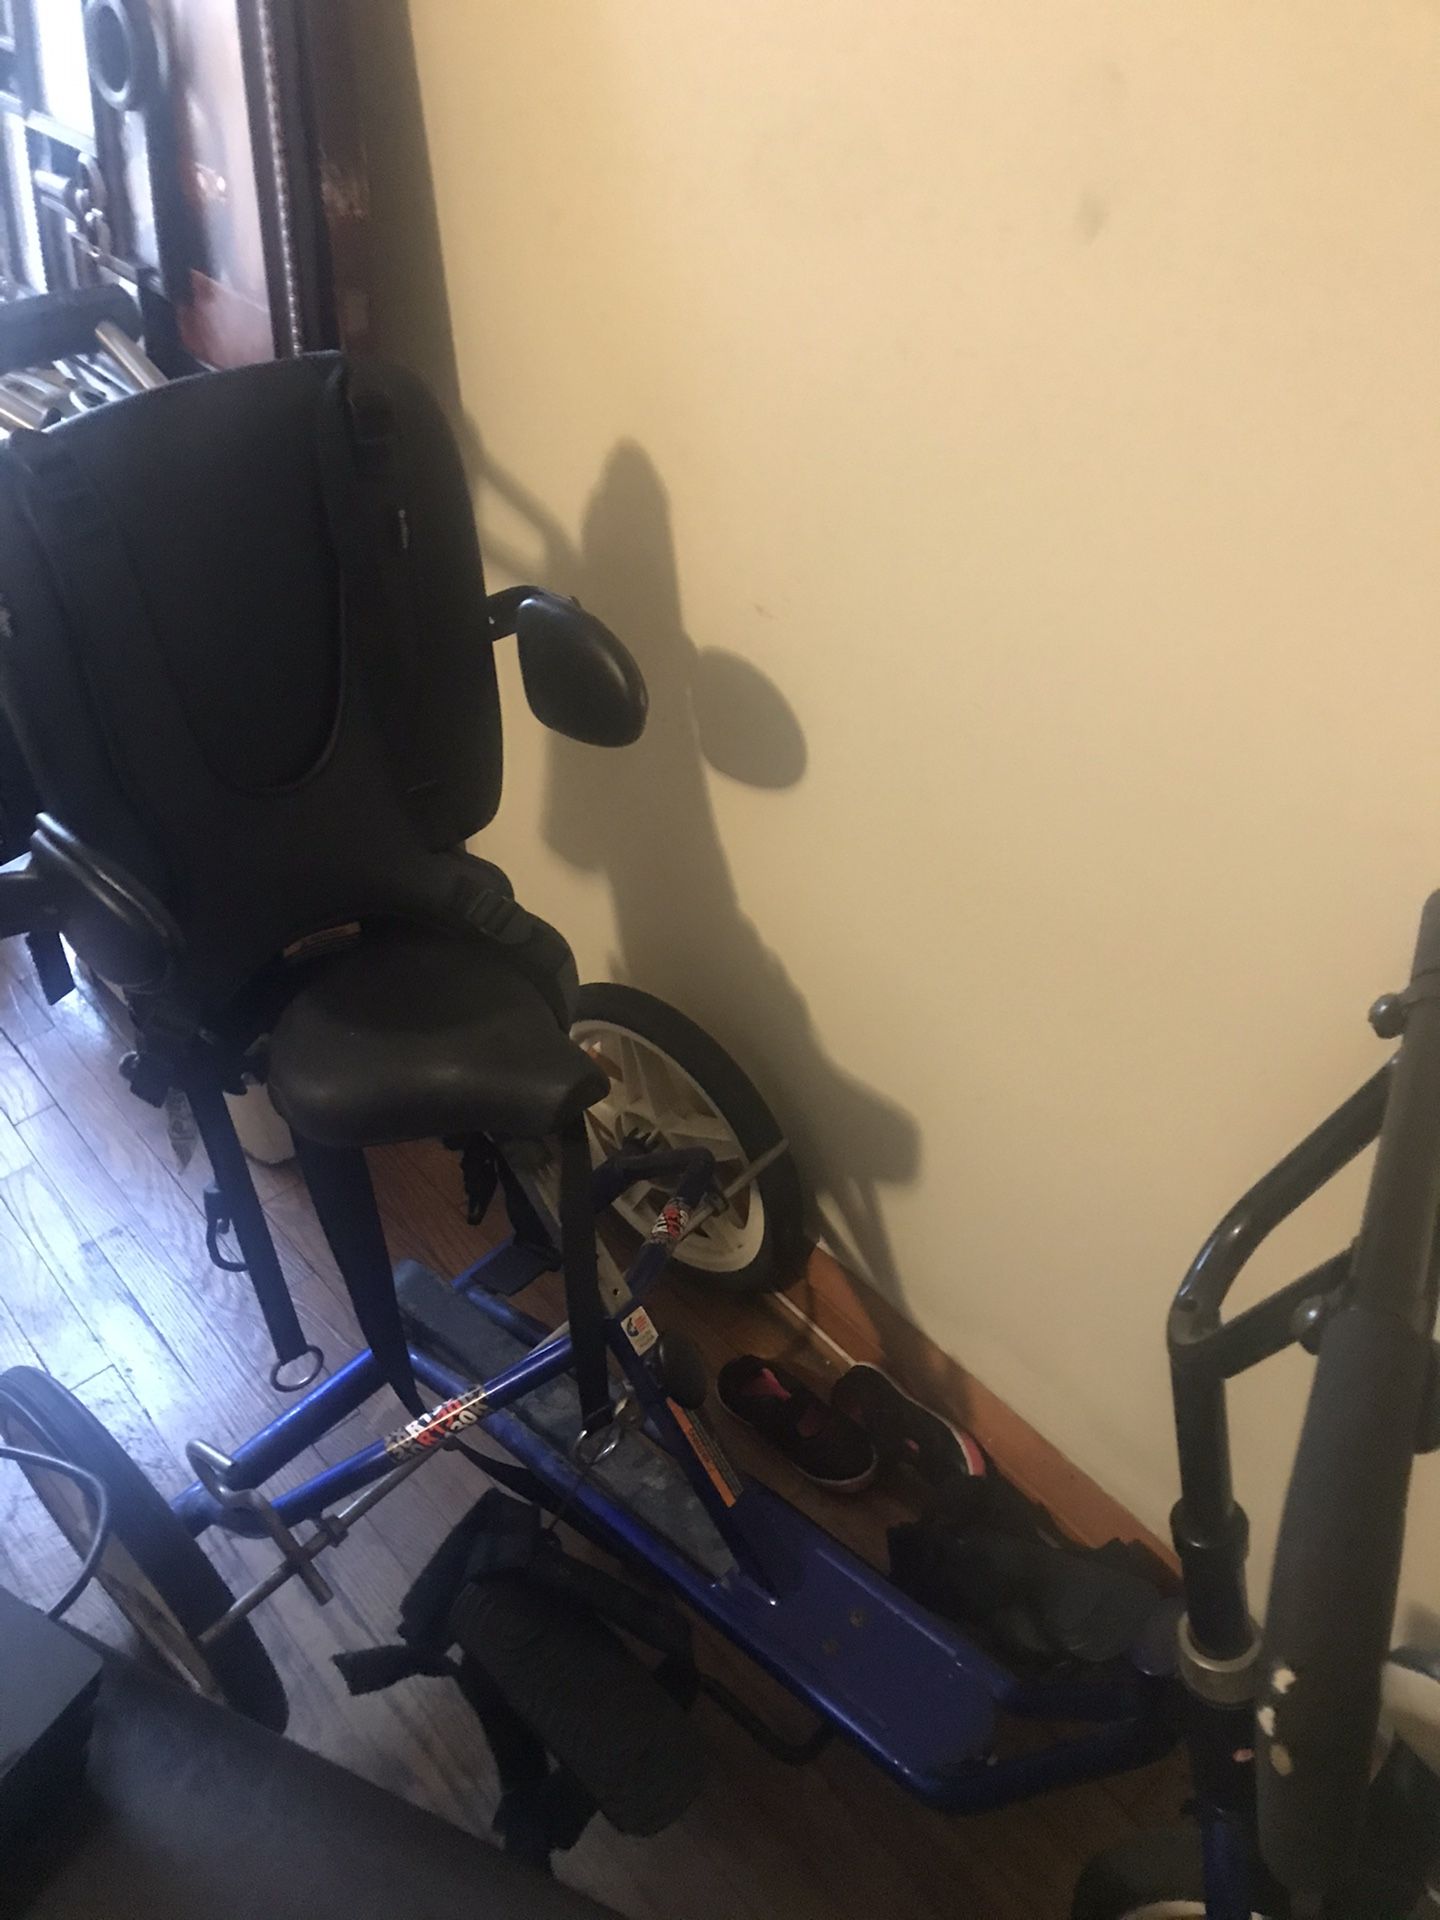 Special needs bike For Child Under160 Pounds